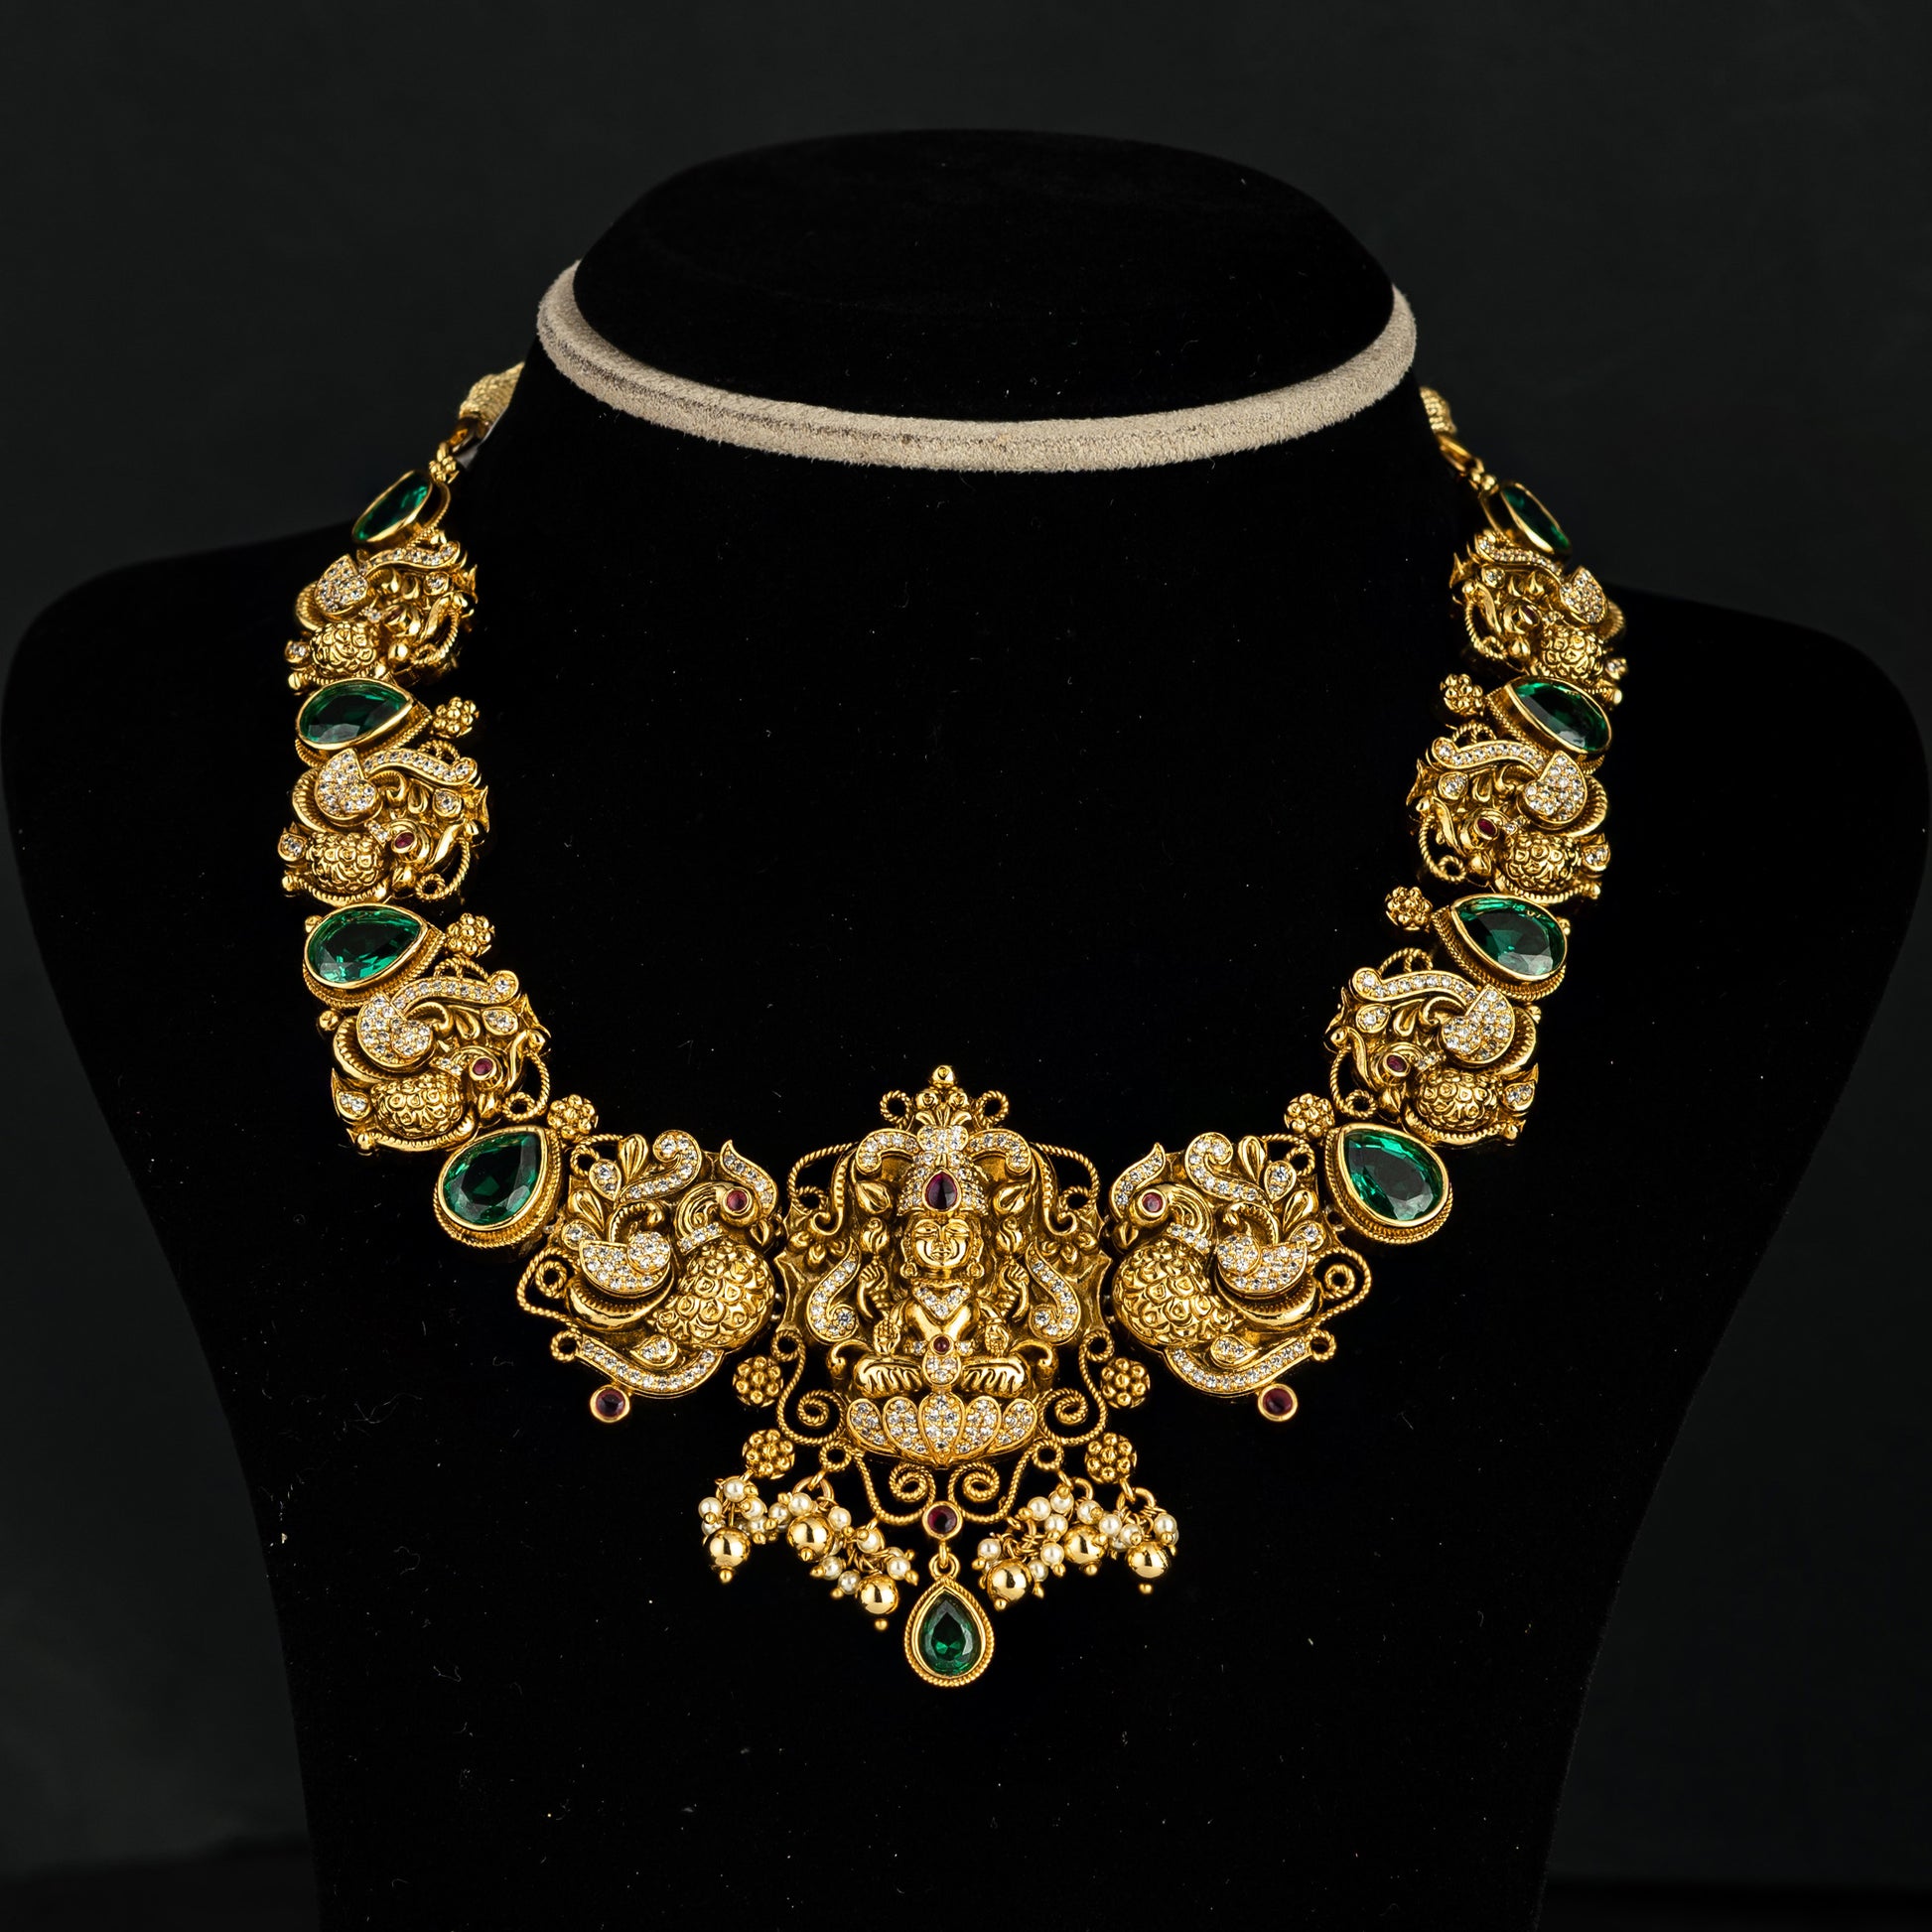 Ithihaasaa Nakshi necklace, Gold plated premium 92.5 silver nakshi necklace featuring CZ and emerald stones